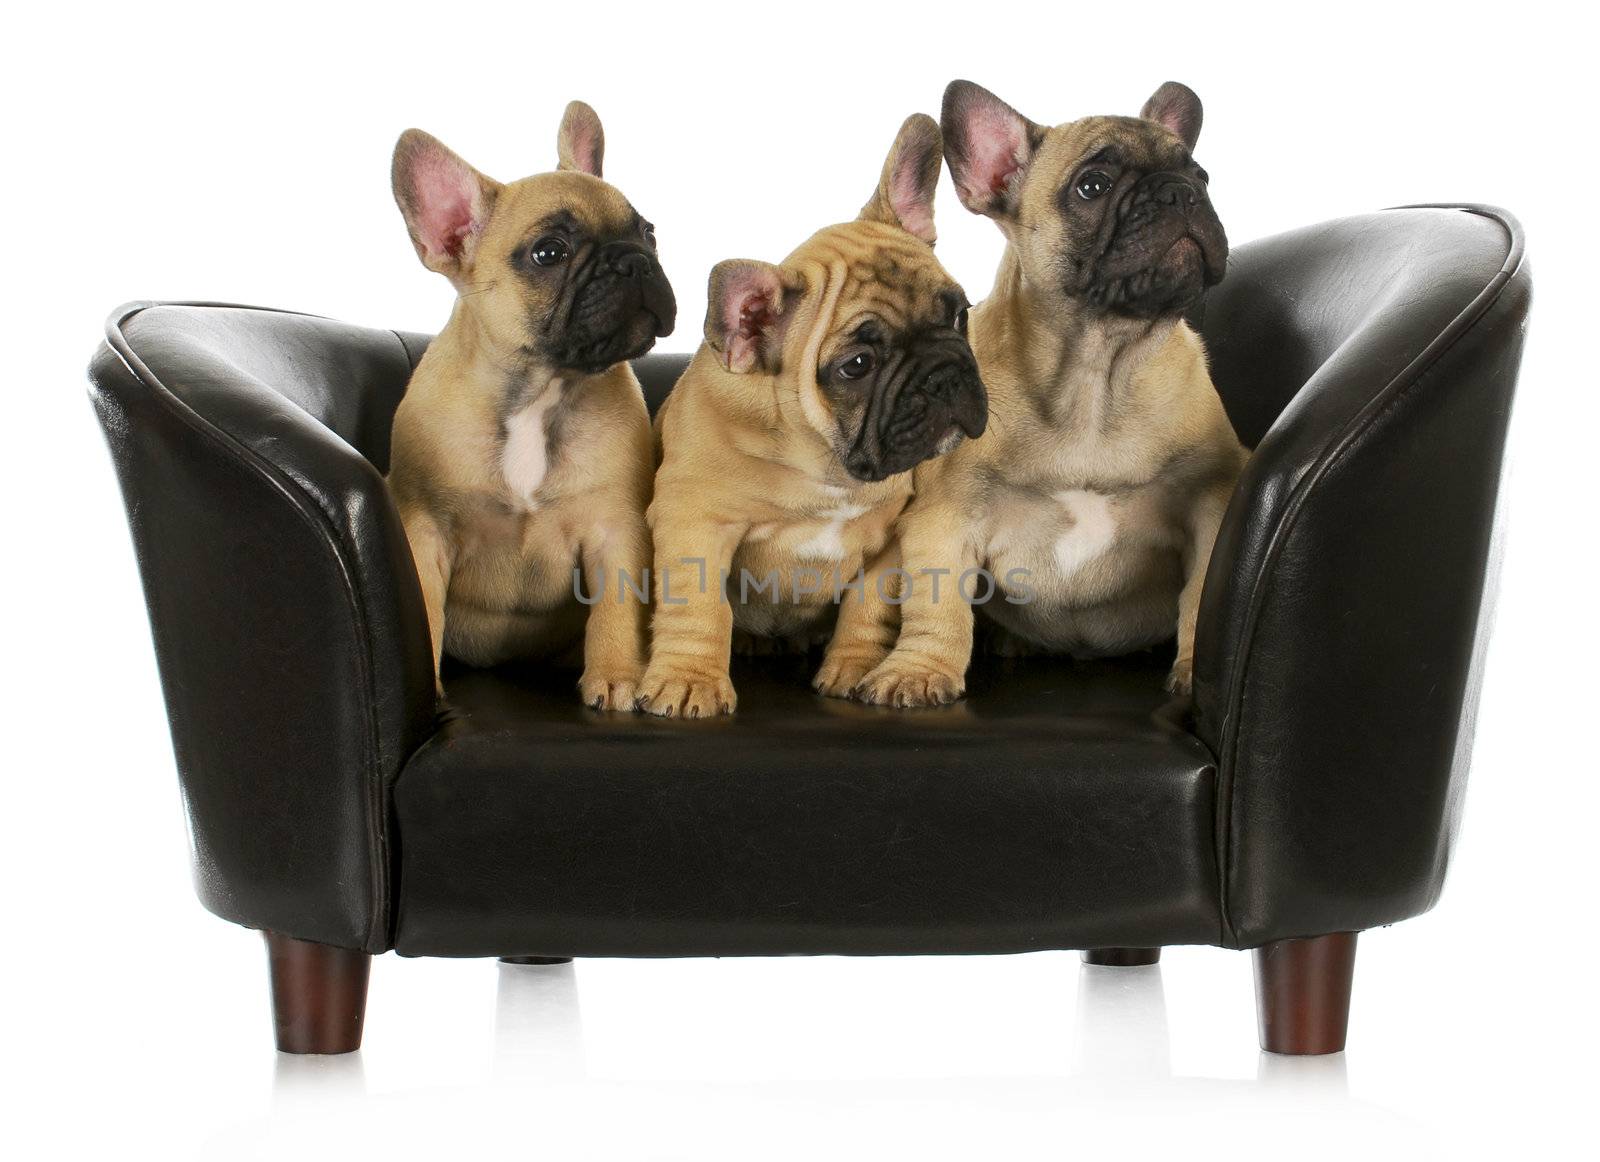 litter of puppies - three french bulldog puppies sitting on a couch on white background - 8 weeks old